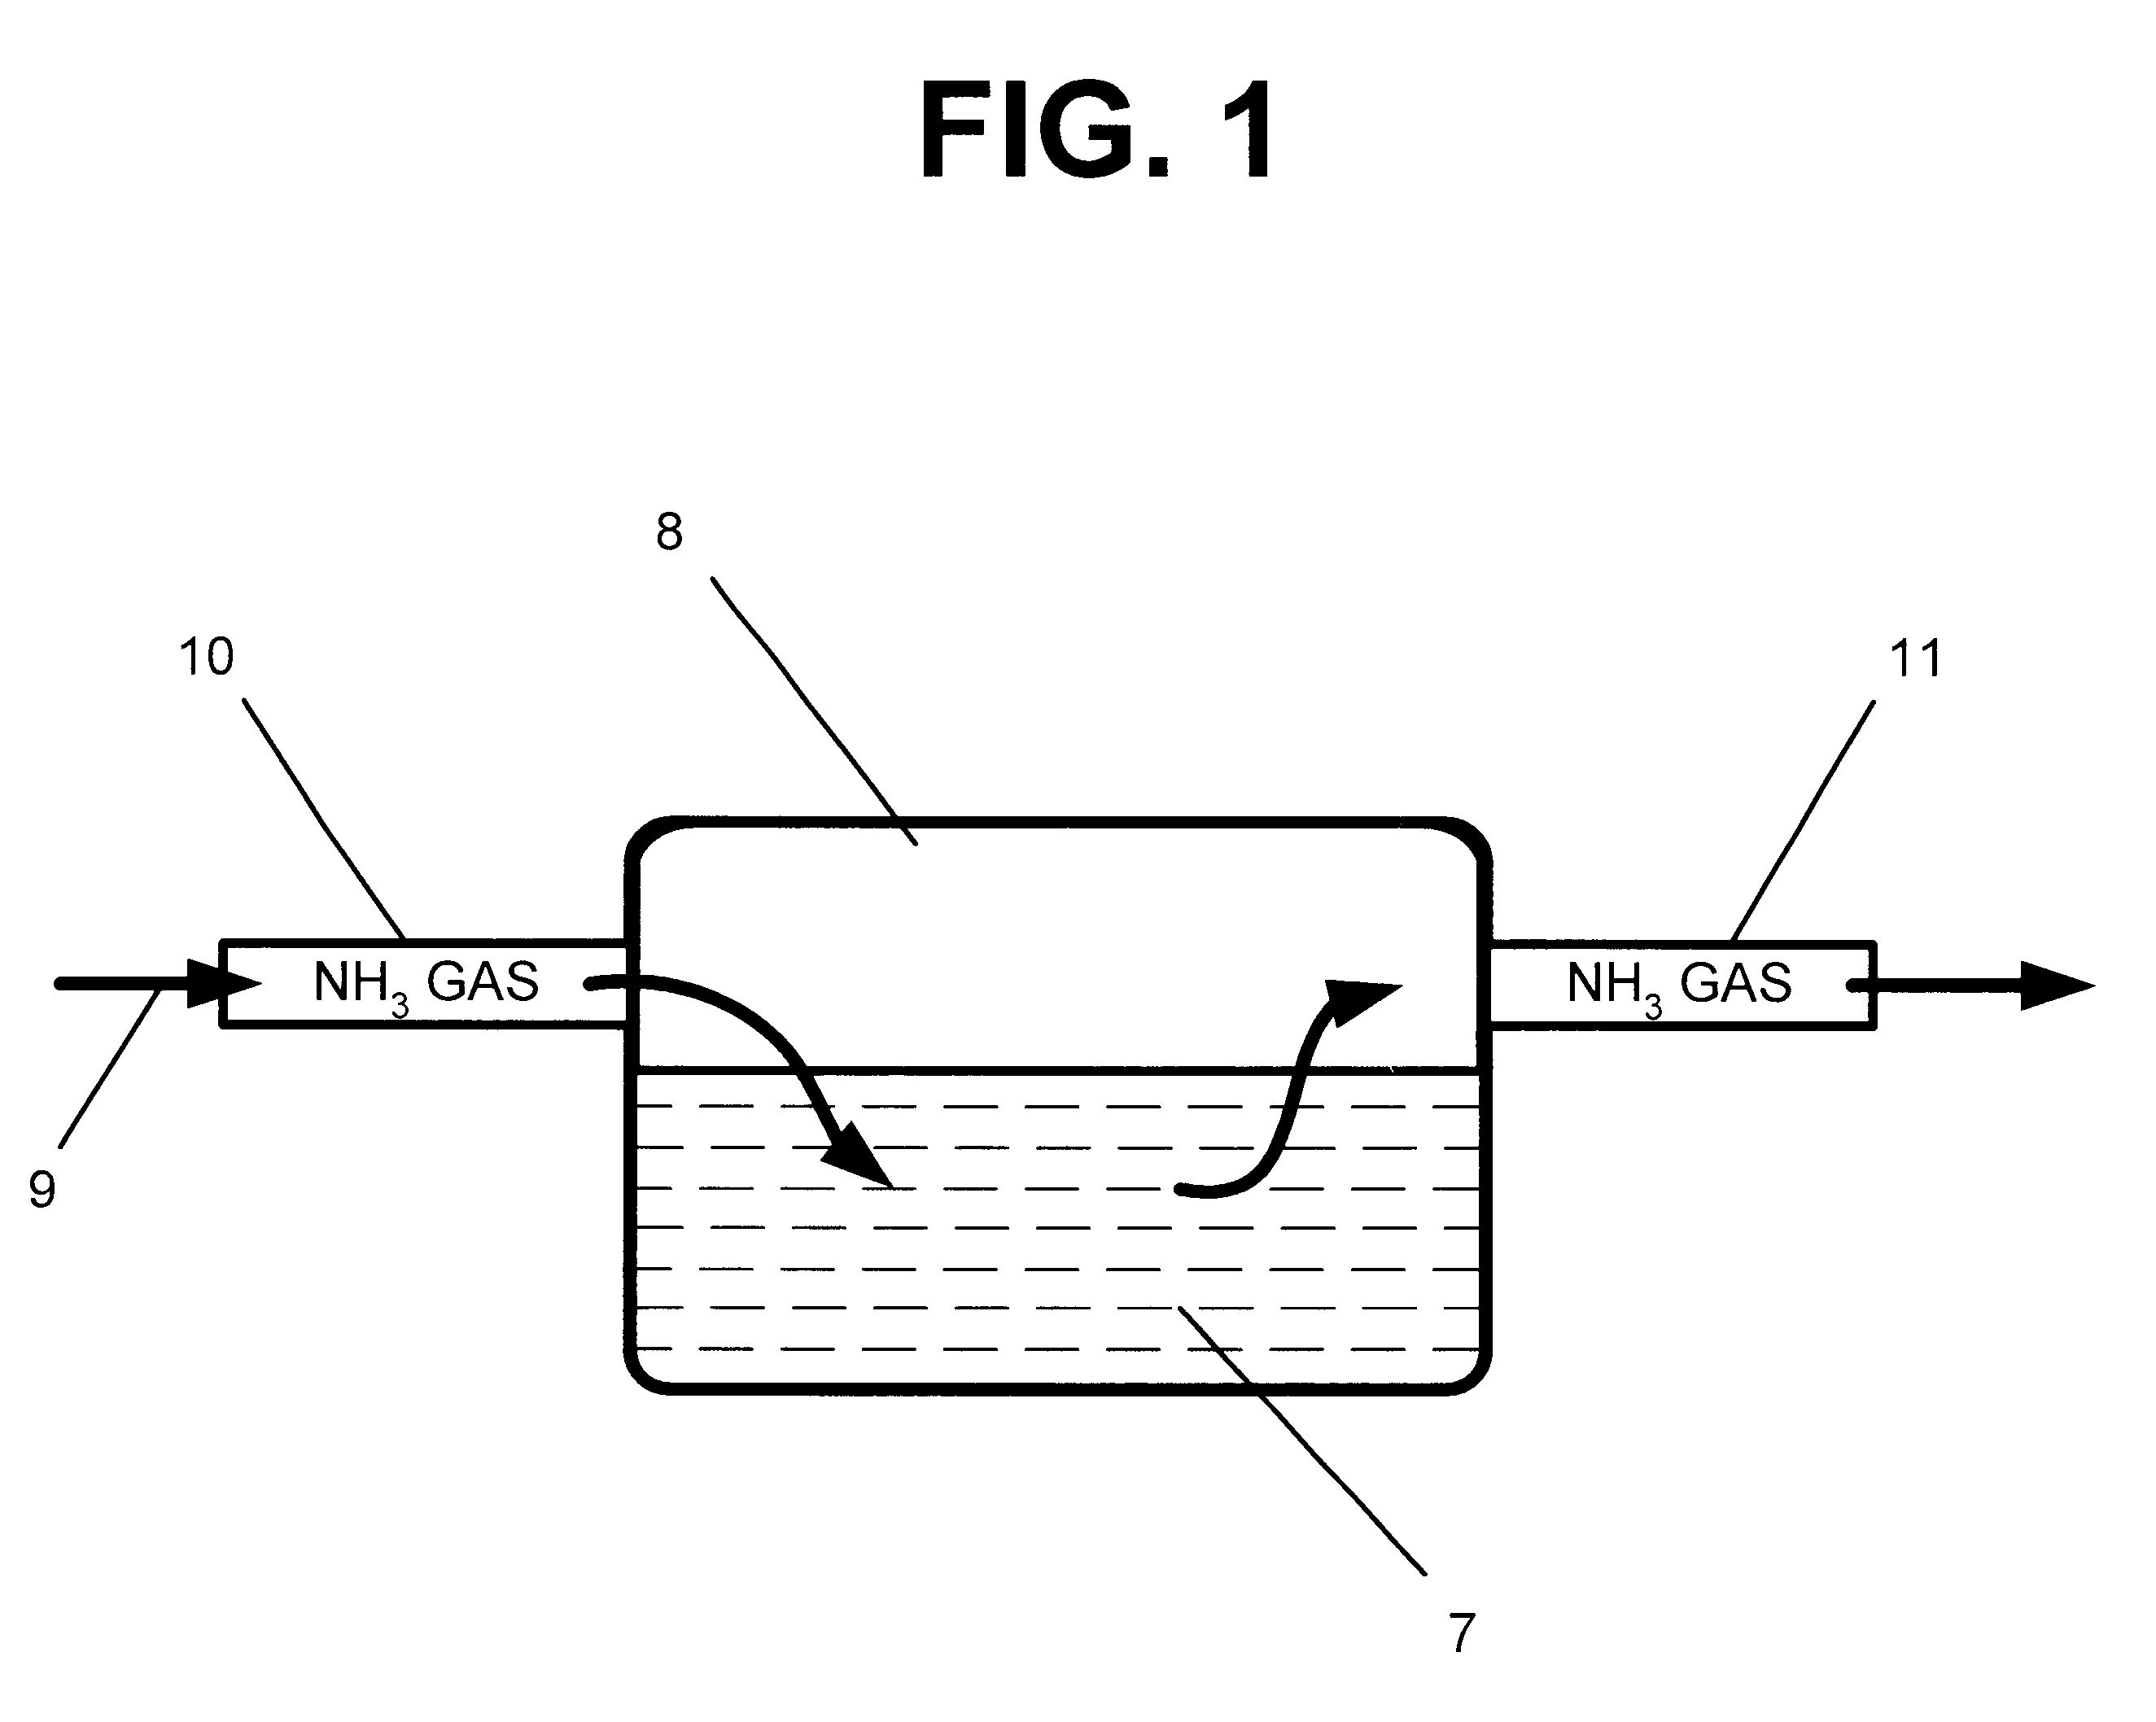 Method of treating commercial grade products to remove undesirable odors and flavors